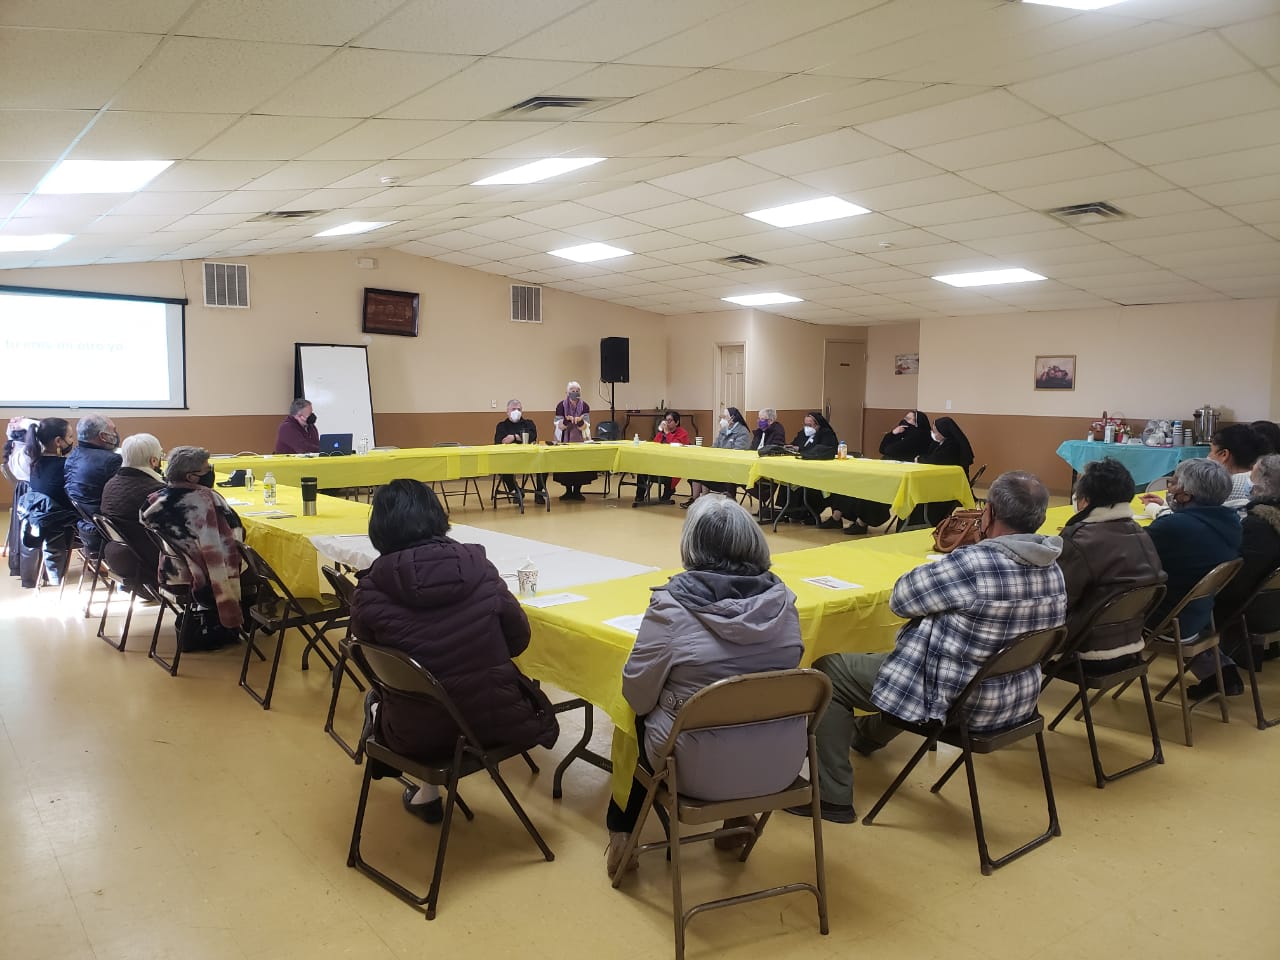 Gathering with the Assumption Sisters in Chaparral, New Mexico